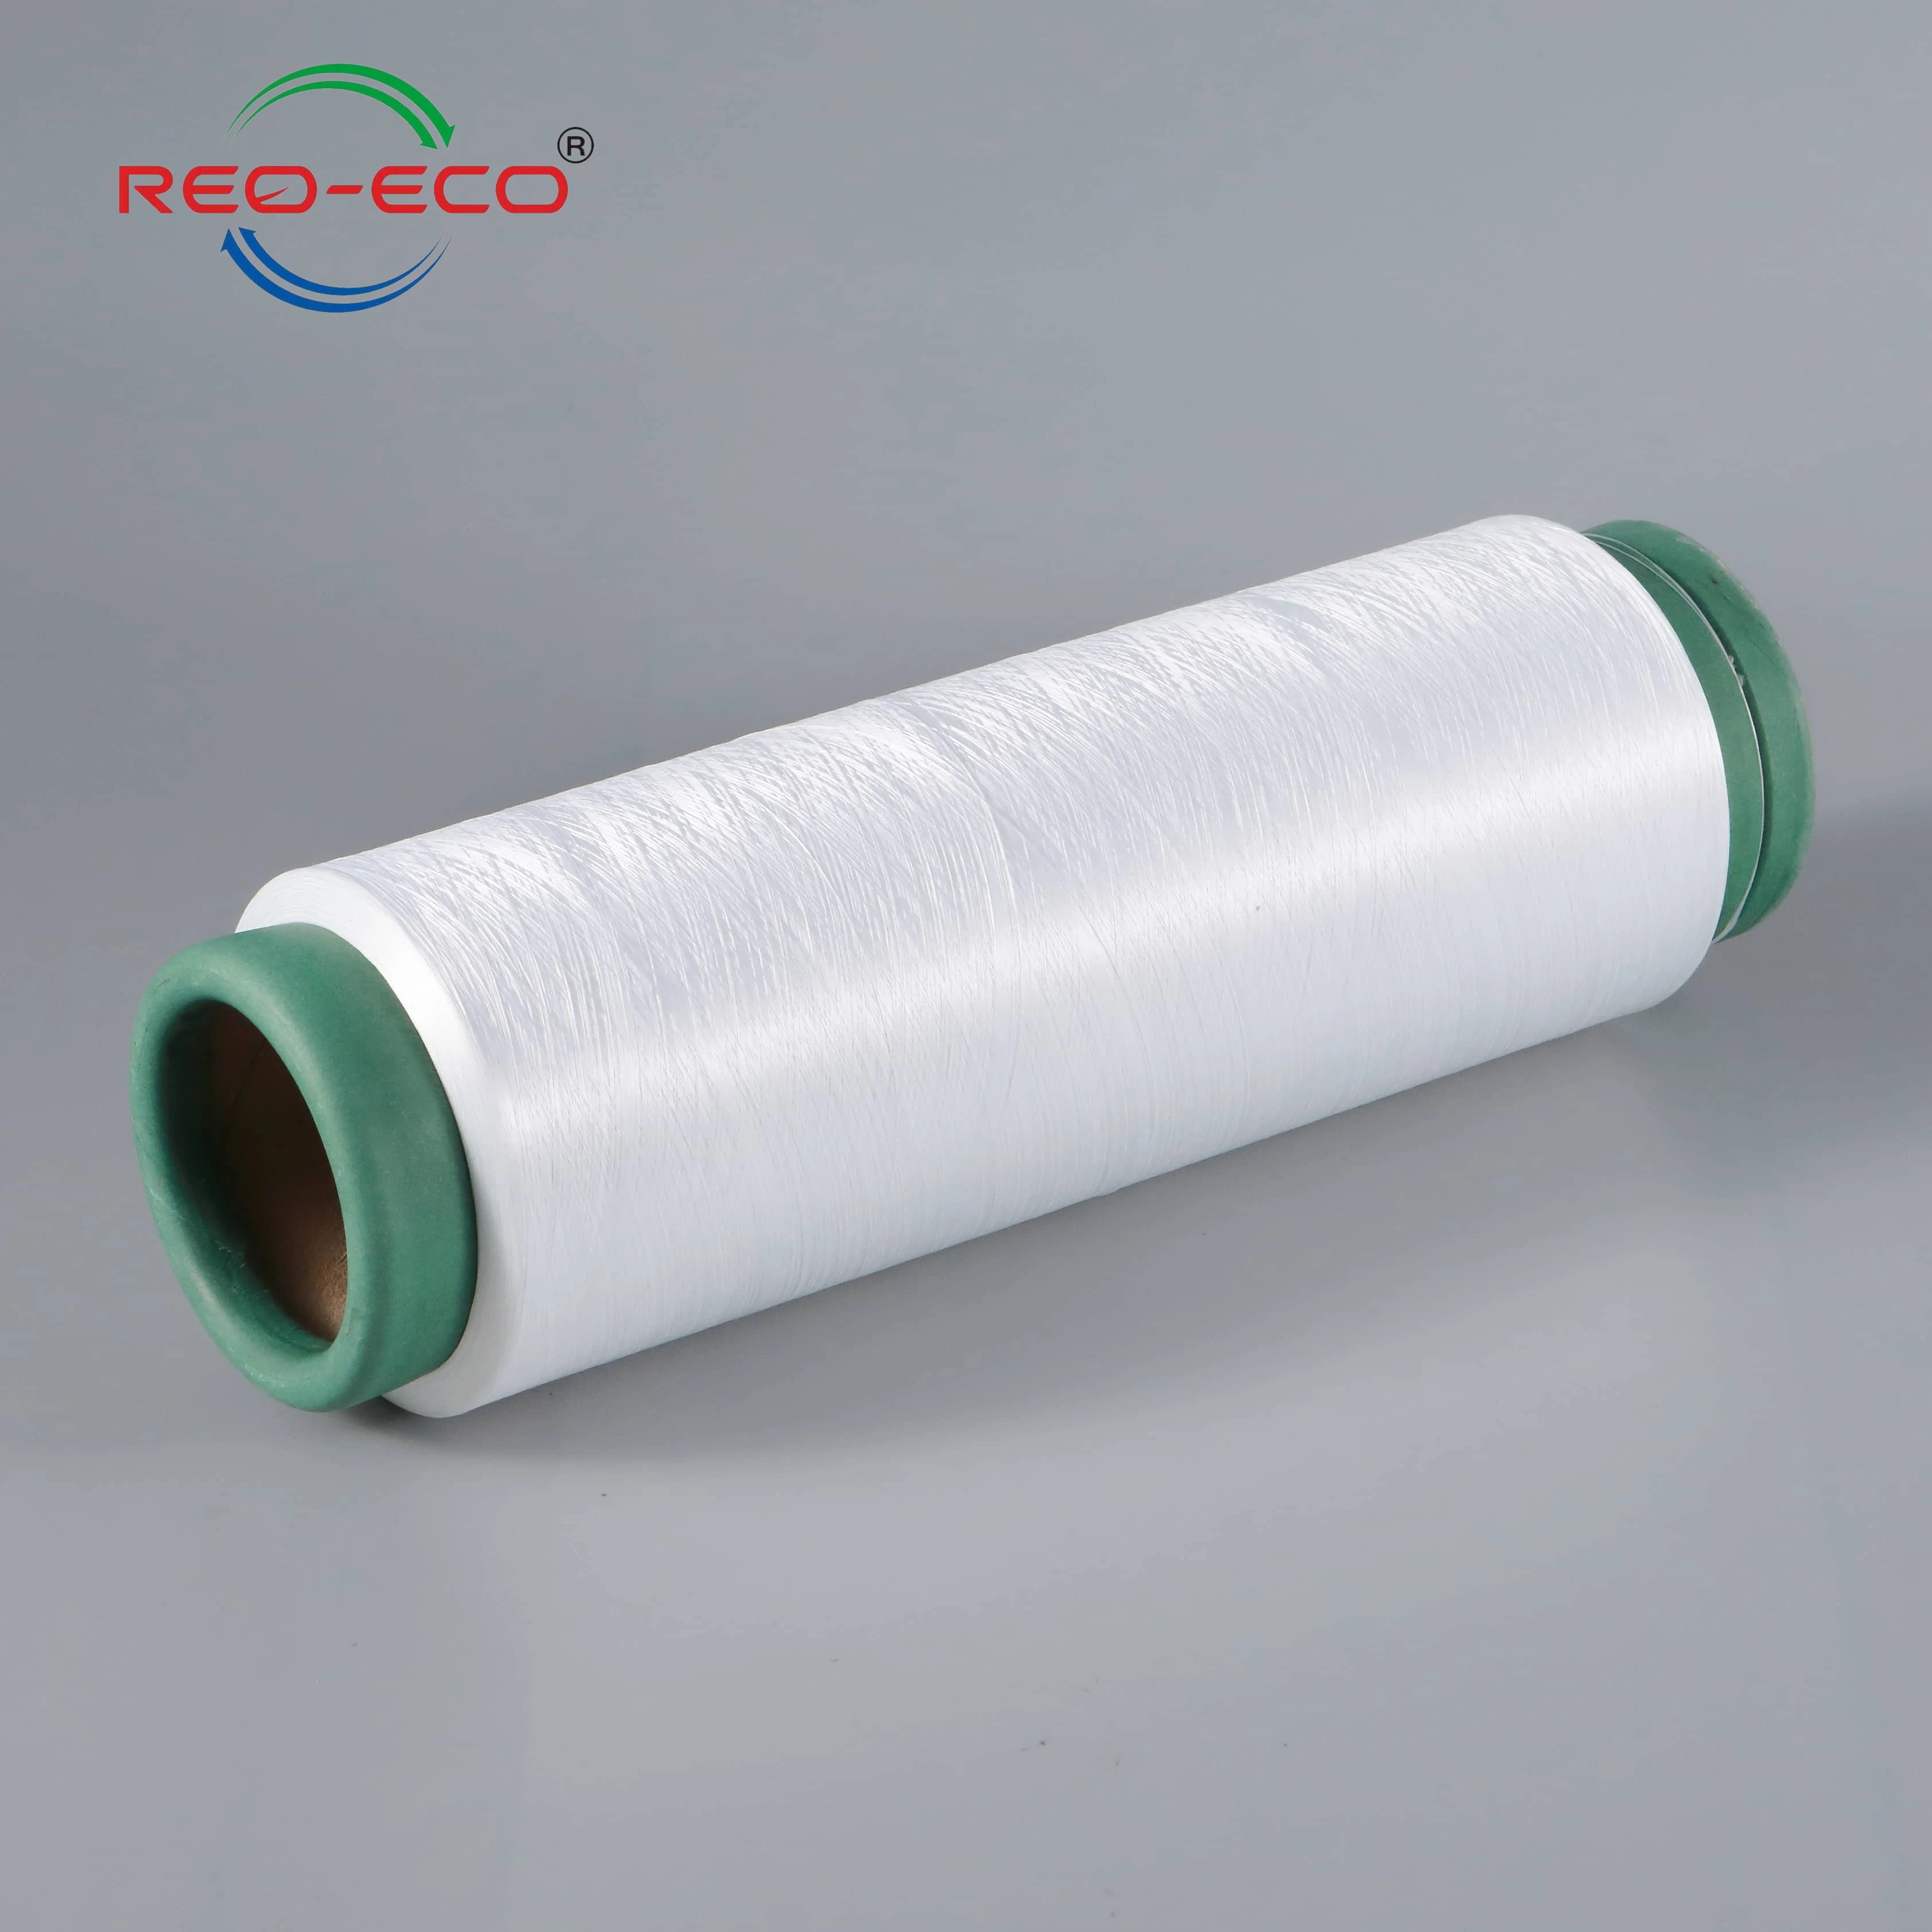 POY 50d/72f 100% Recycle Polyester Yarn for Weaving with Grs